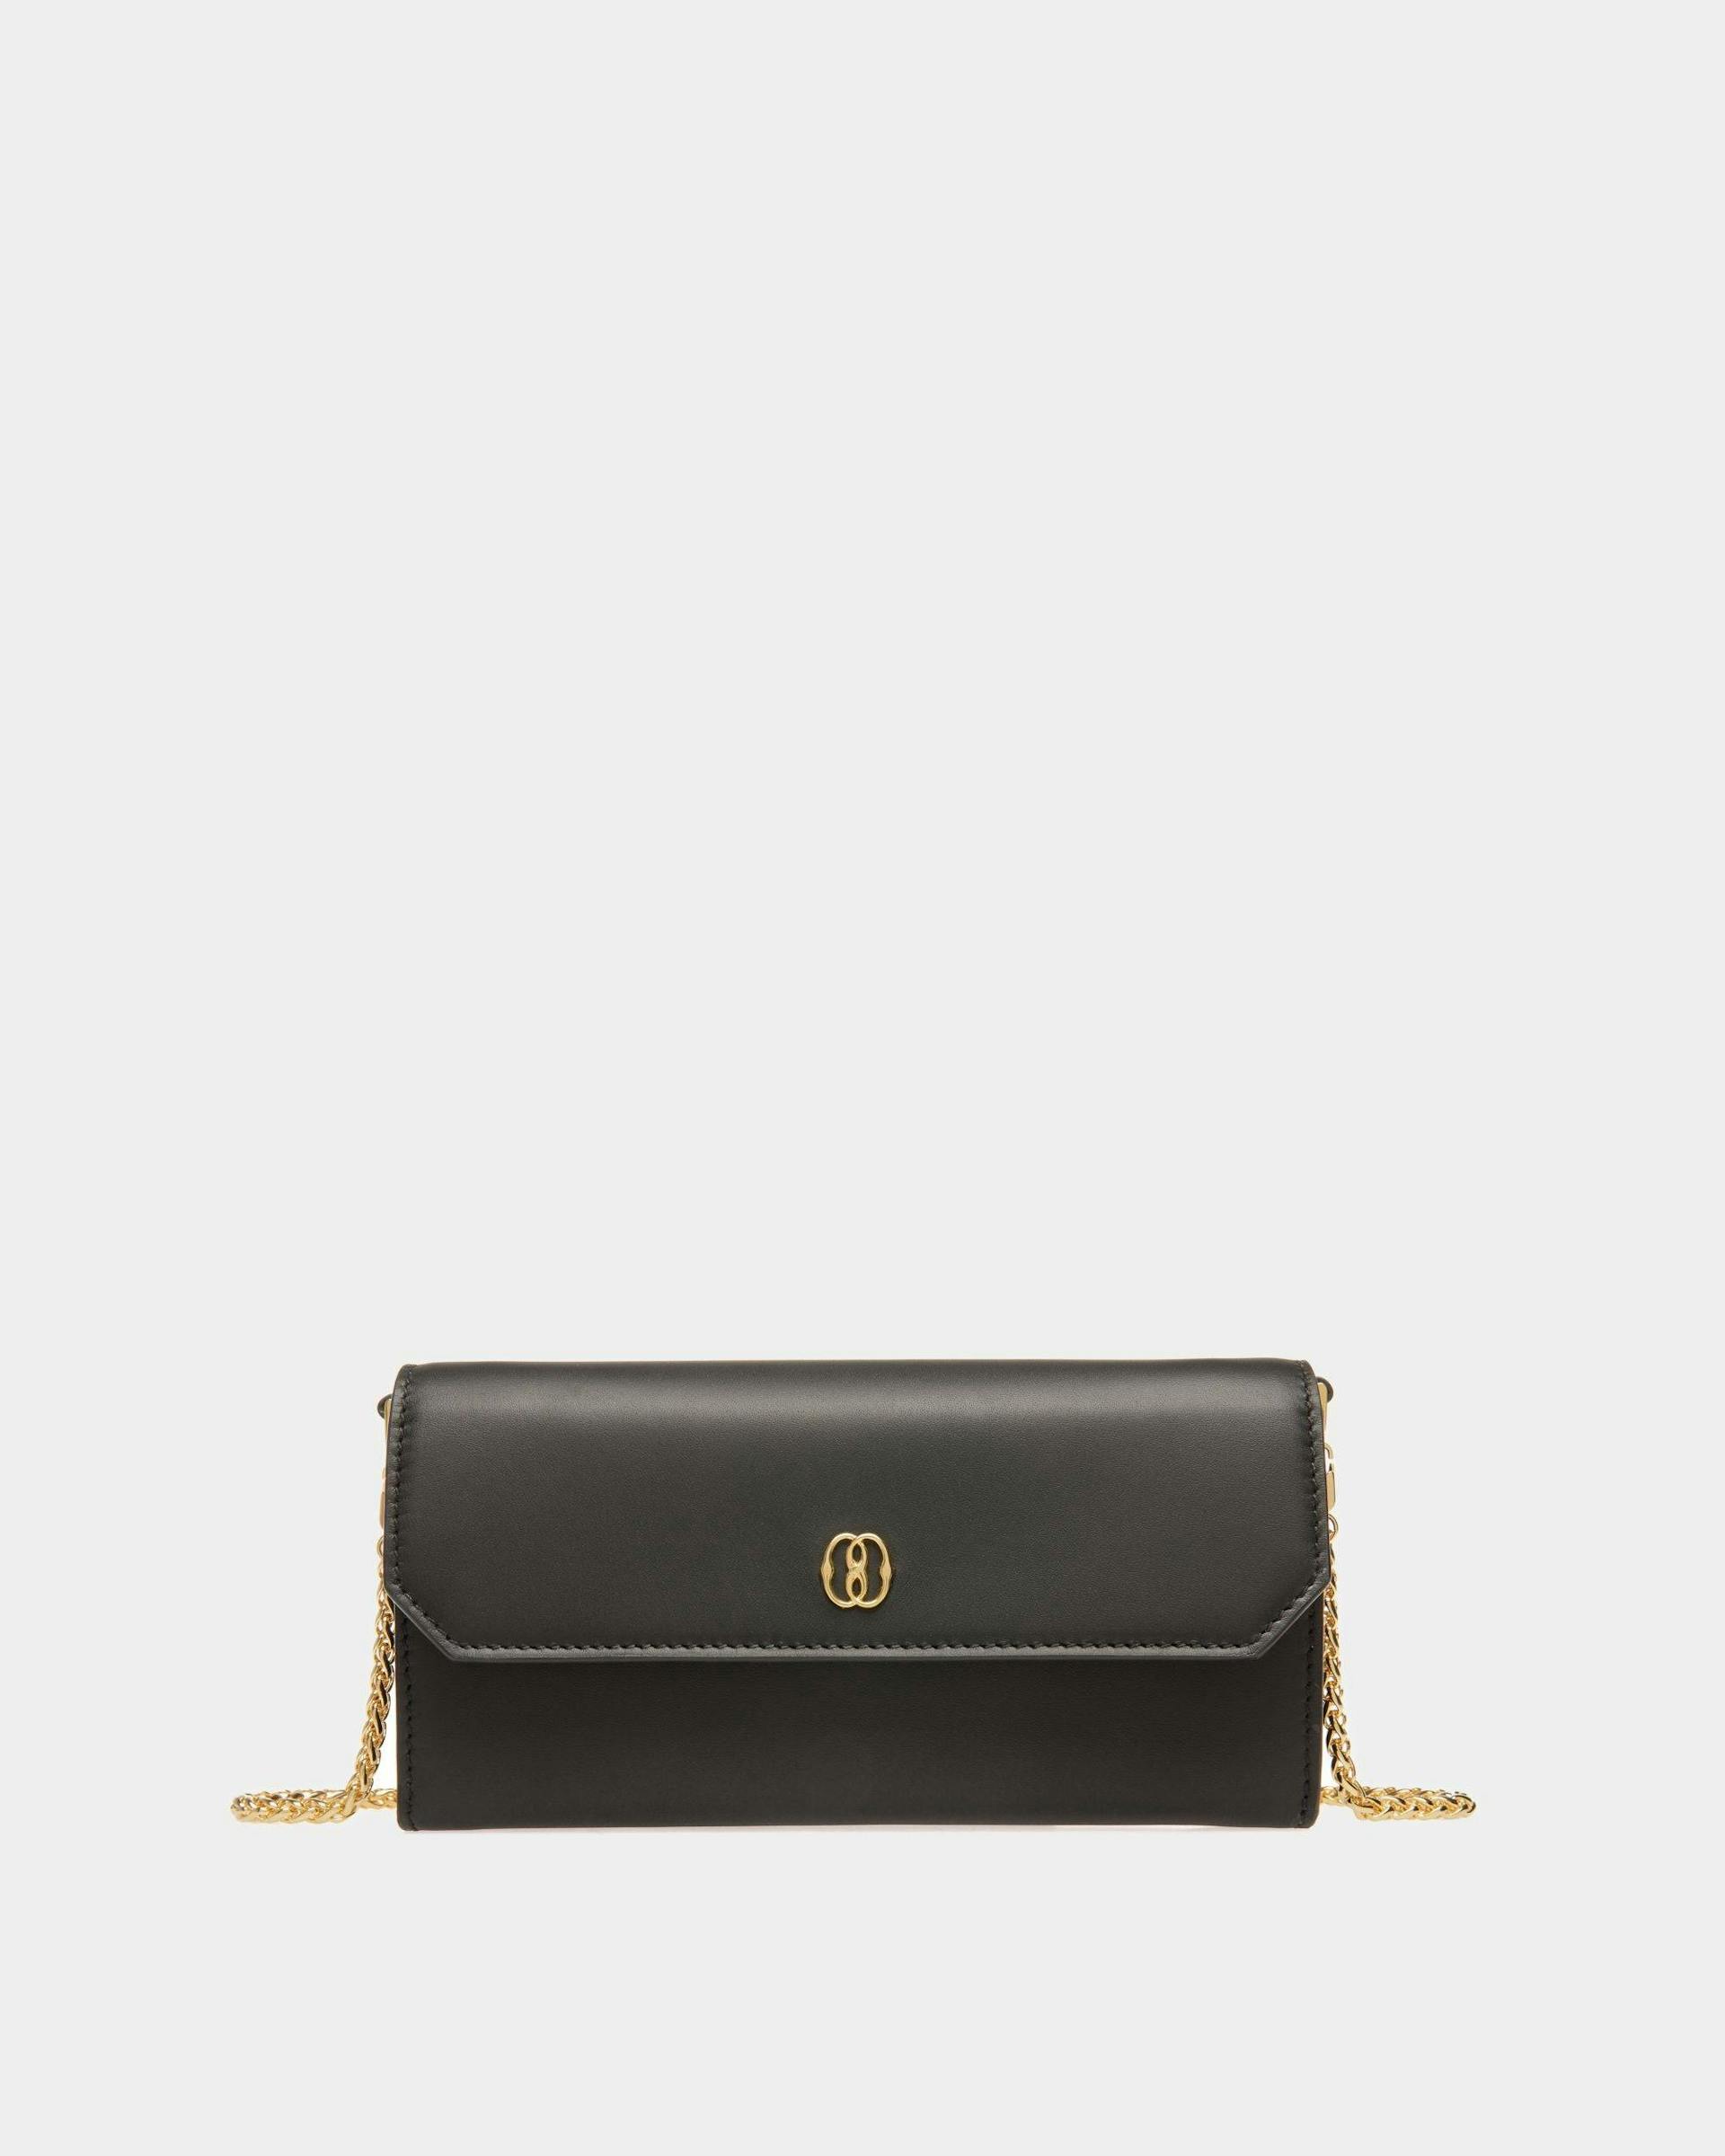 Women's Emblem Travel Wallet In Black Leather | Bally | Still Life Front